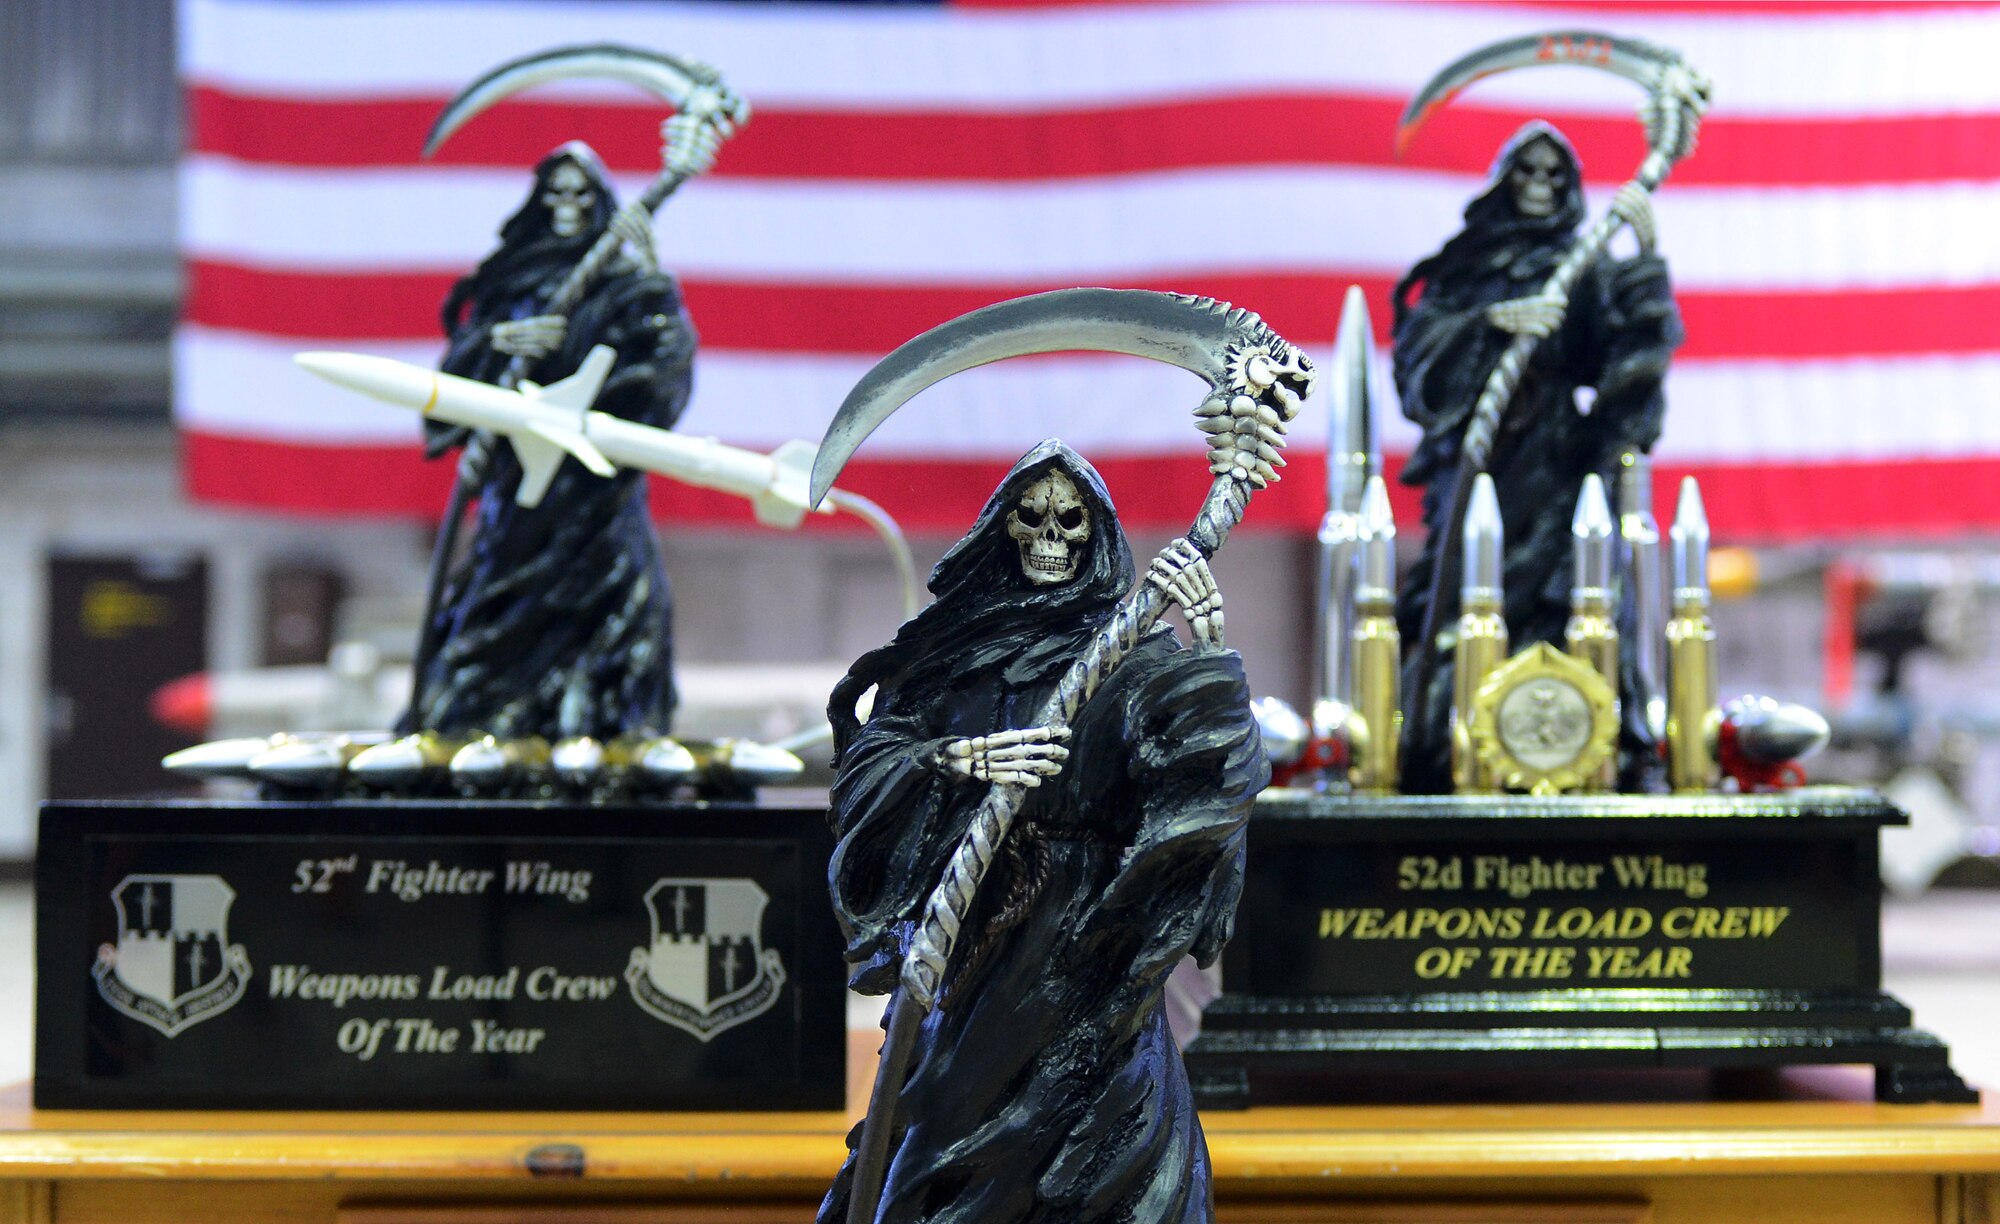 Weapons Load Crew of the Year trophies await the winner of the weapons load competition in Hangar 1 at Spangdahlem Air Base, Germany, Jan. 9, 2015. The winners of the competition will be announced later this month at an awards ceremony. (U.S. Air Force photo by Airman 1st Class Luke Kitterman/Released)  